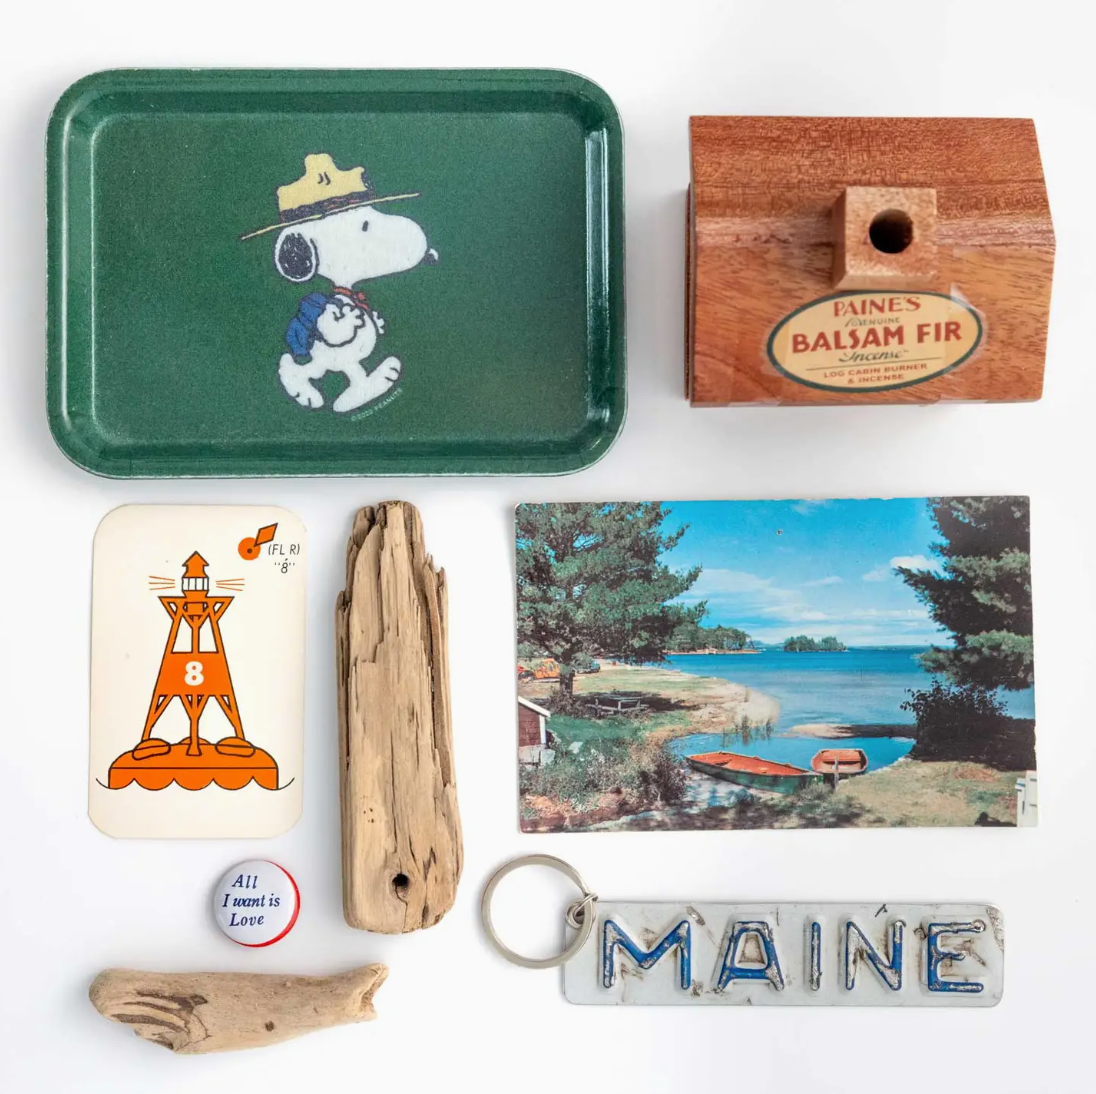 Various mementos arranged on a white background: a tray with a Peanuts design from Faire, a wooden box labeled "Paines Balsam Fir," a playing card featuring a lighthouse, a driftwood piece from Scottsdale Arizona, a postcard of a seaside view, and a keychain spelling.